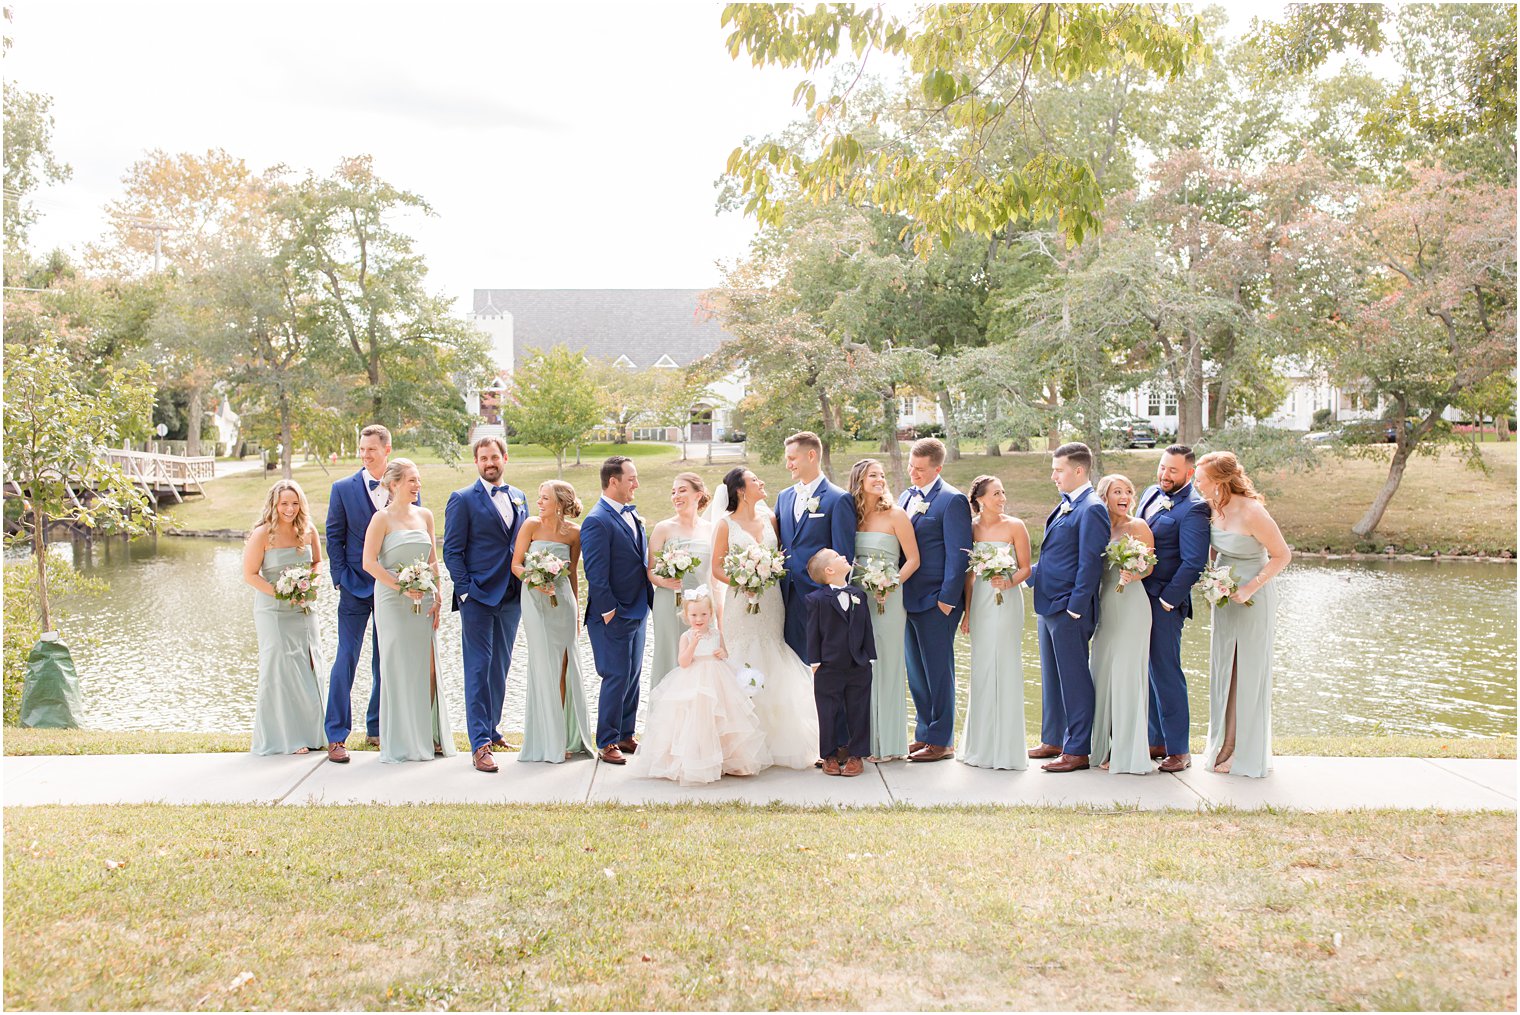 newlyweds pose with wedding party in sage green and navy blue